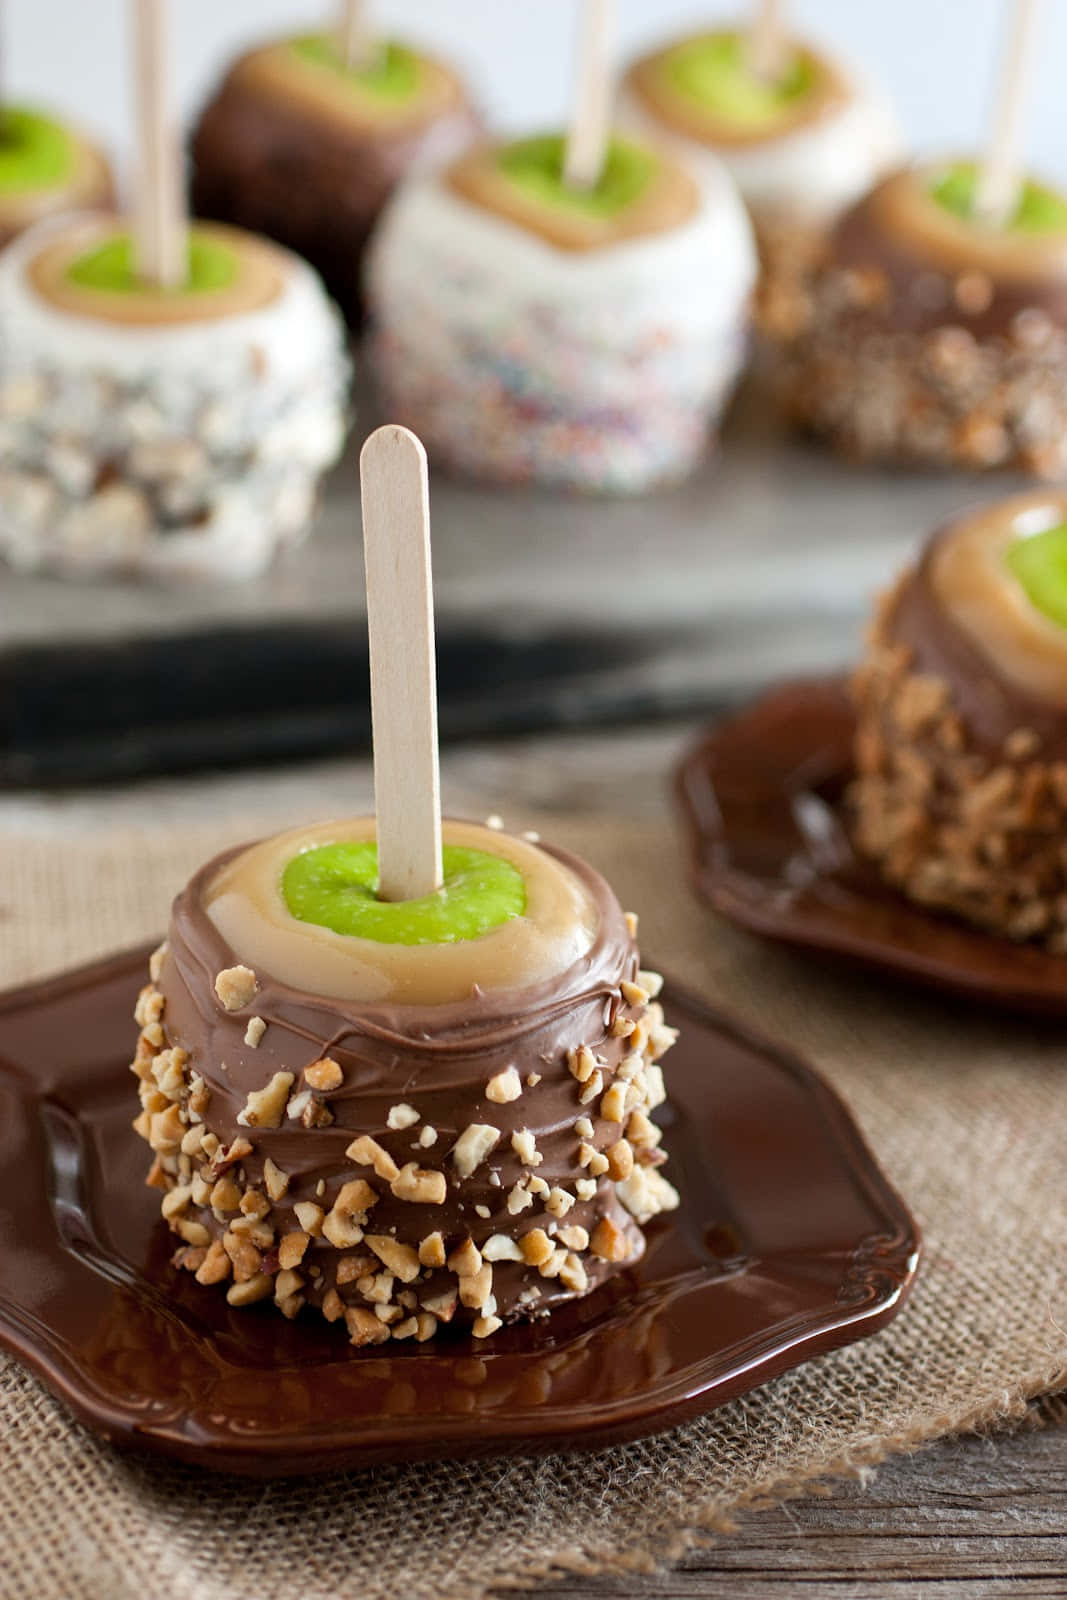 Delicious Caramel Apples with Assorted Toppings Wallpaper